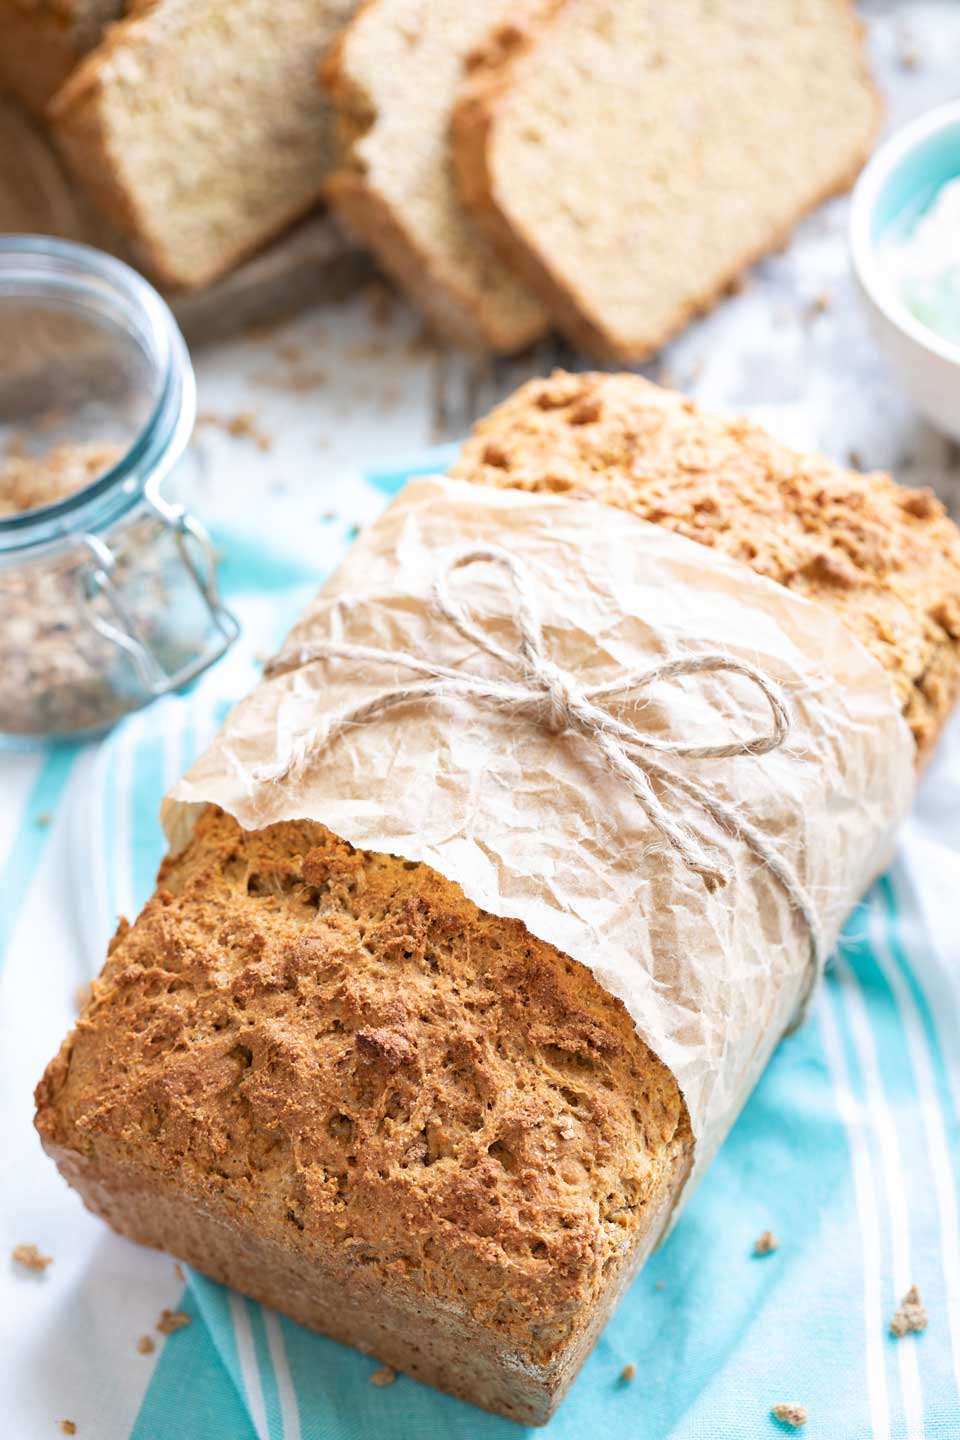 baked loaf of this no yeast bread, wrapped around the middle with a wide strip of brown parchment and tied with a little rope bow as a homemade gift